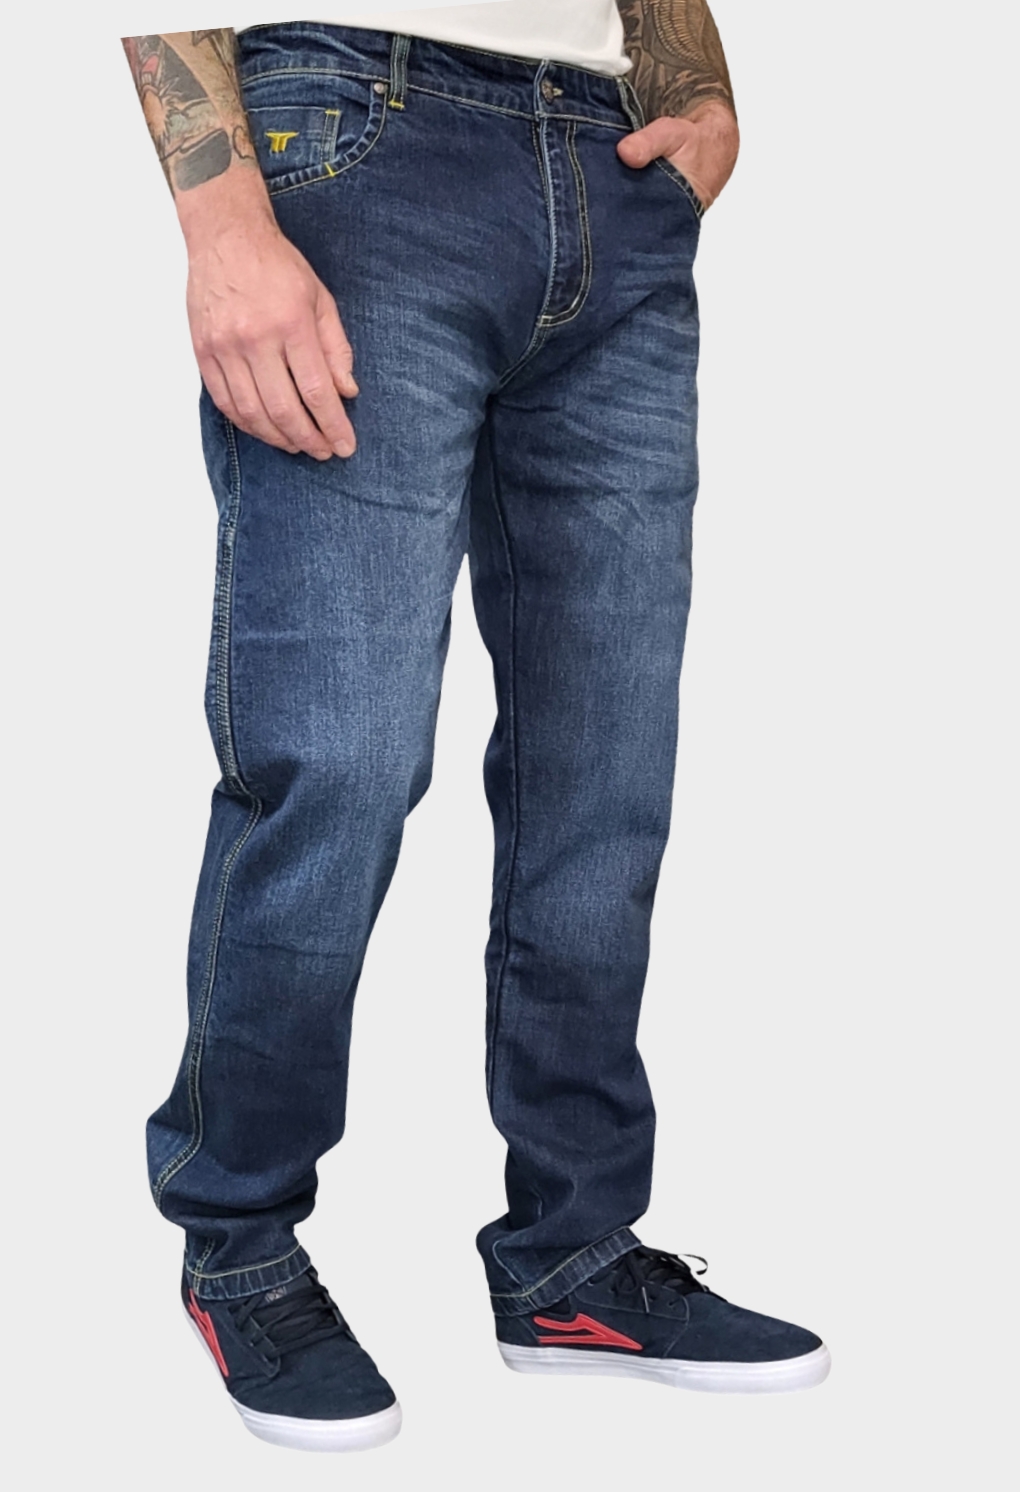 Motorcycle Jeans with Kevlar